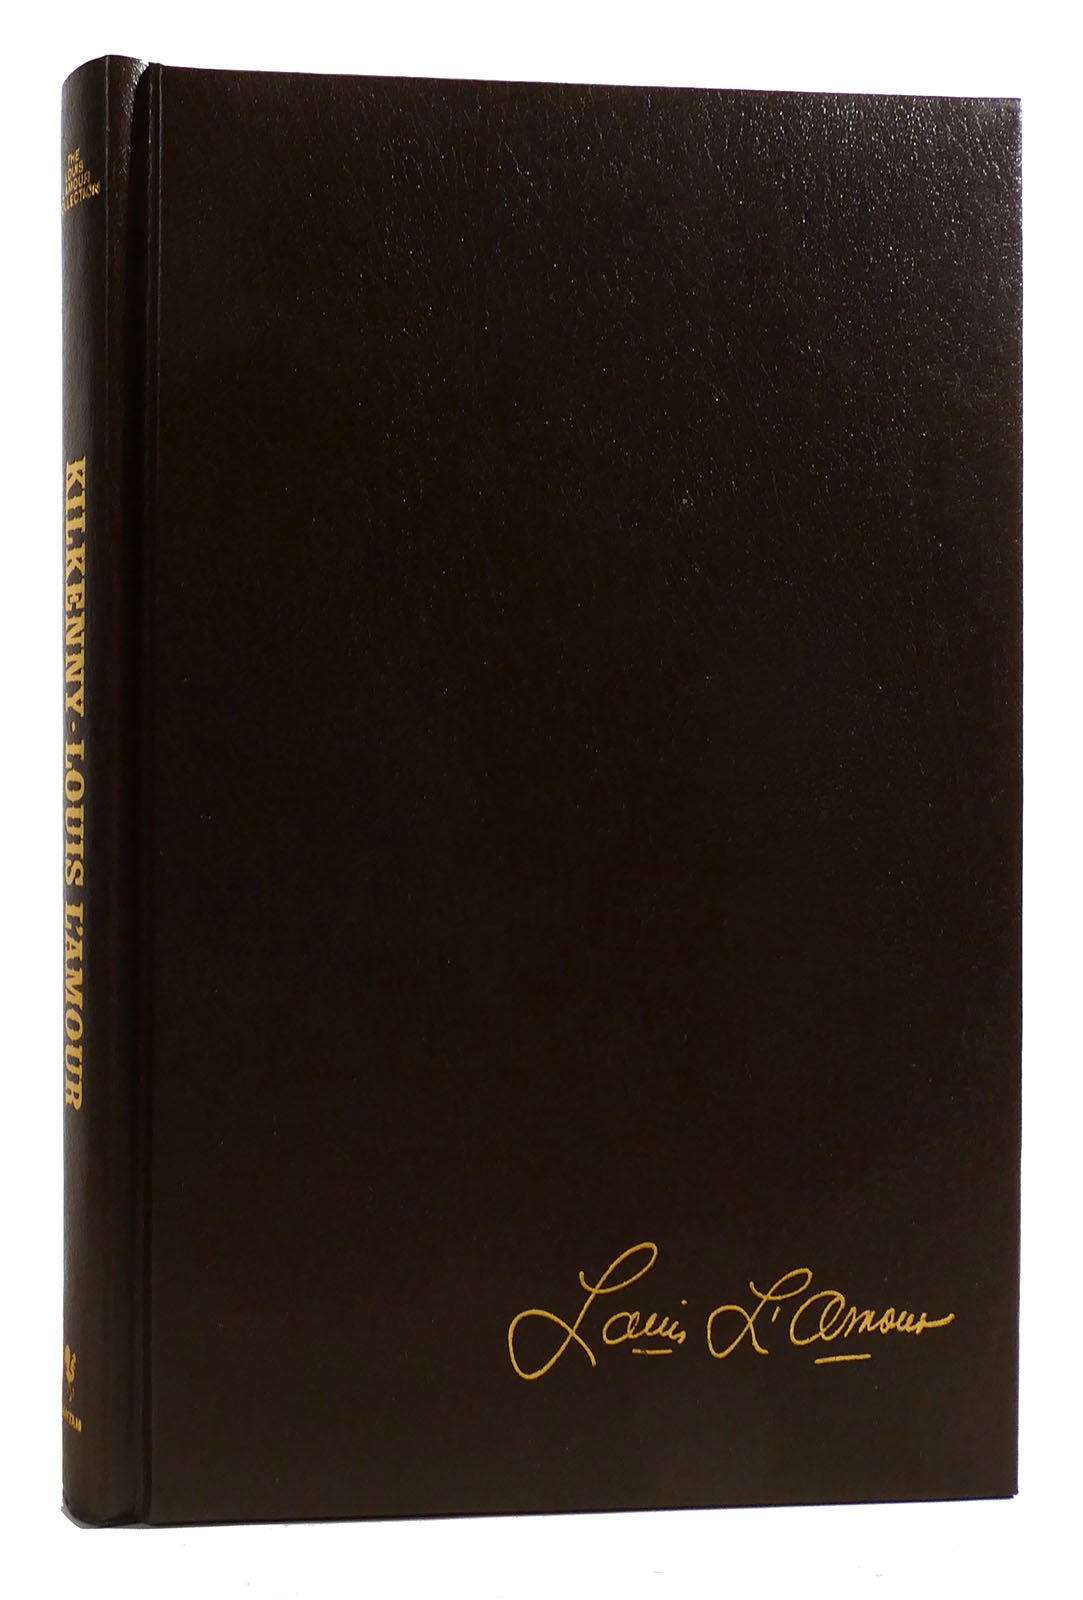 KILKENNY Louis L'amour Hardcover Collection | Louis L'Amour | Collector ...